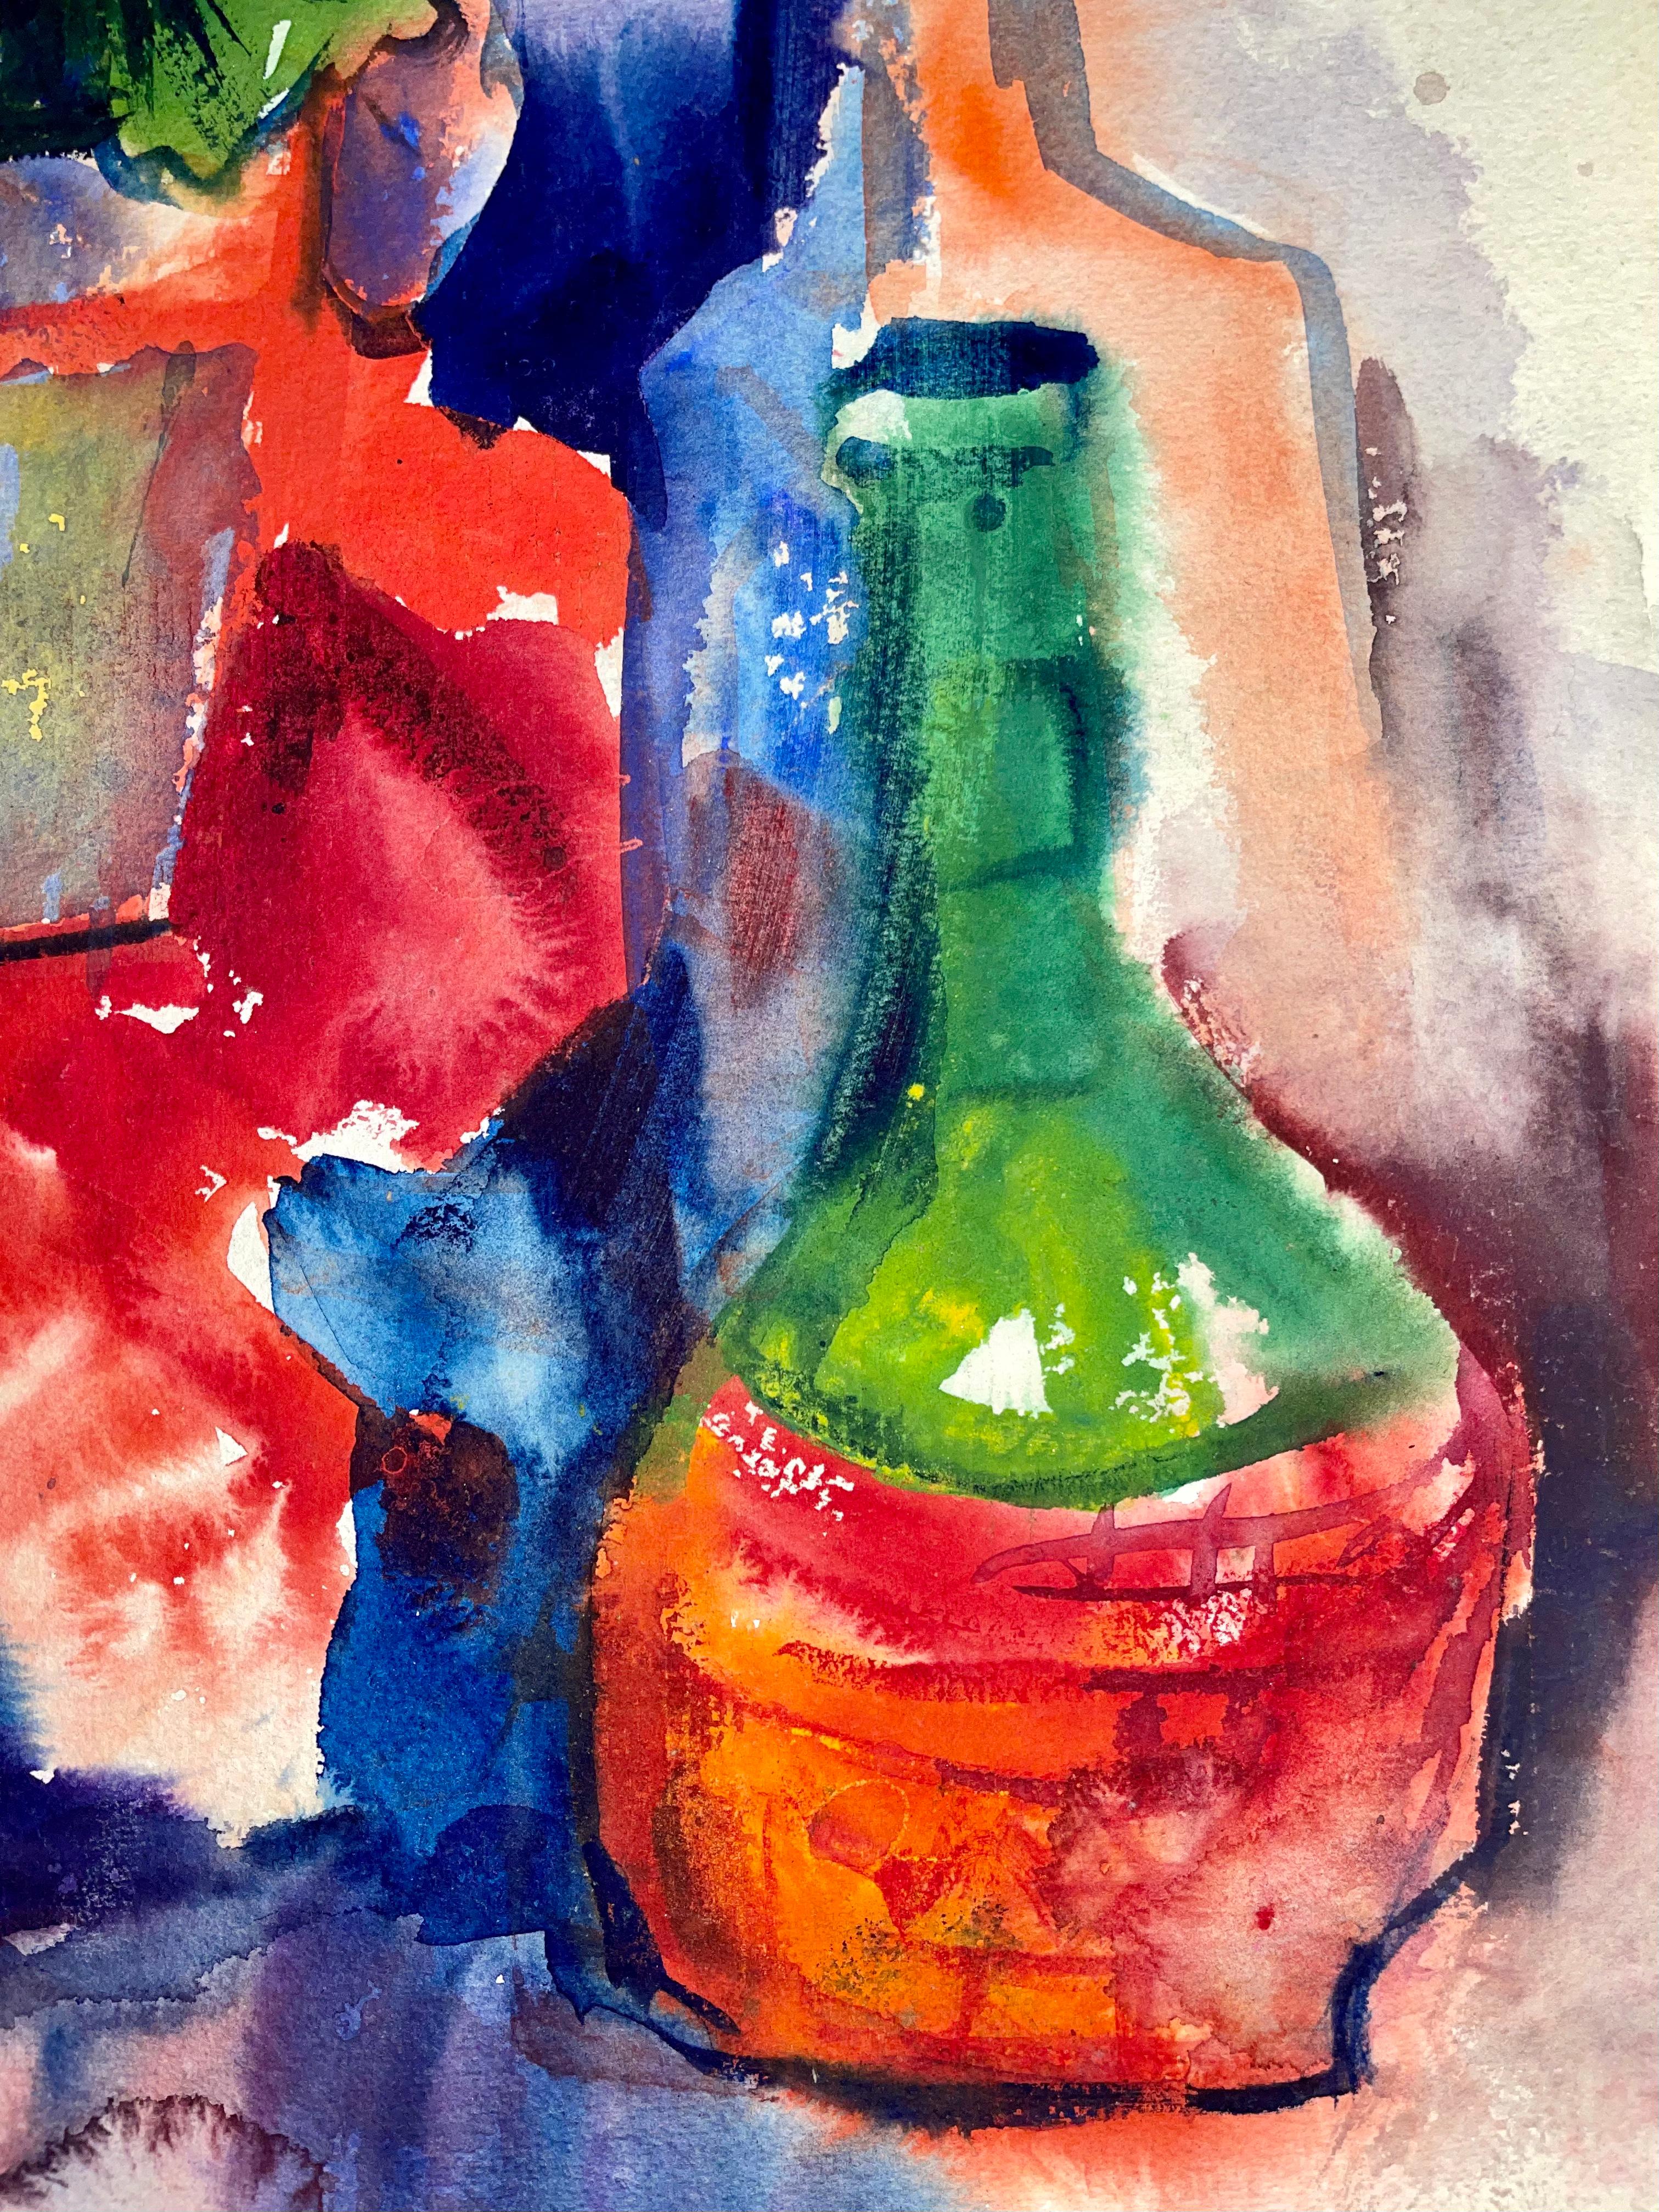 Artist: Ian Hornak (1944-2002)
Title: Untitled (Abstract Still Life with Flowers, Plants and Bottles)
Year: 1963
Medium: Watercolor on heavy archival paper
Size: 29.5 x 21 inches
Condition: Good
Provenance: Estate of Ian Hornak, East Hampton,